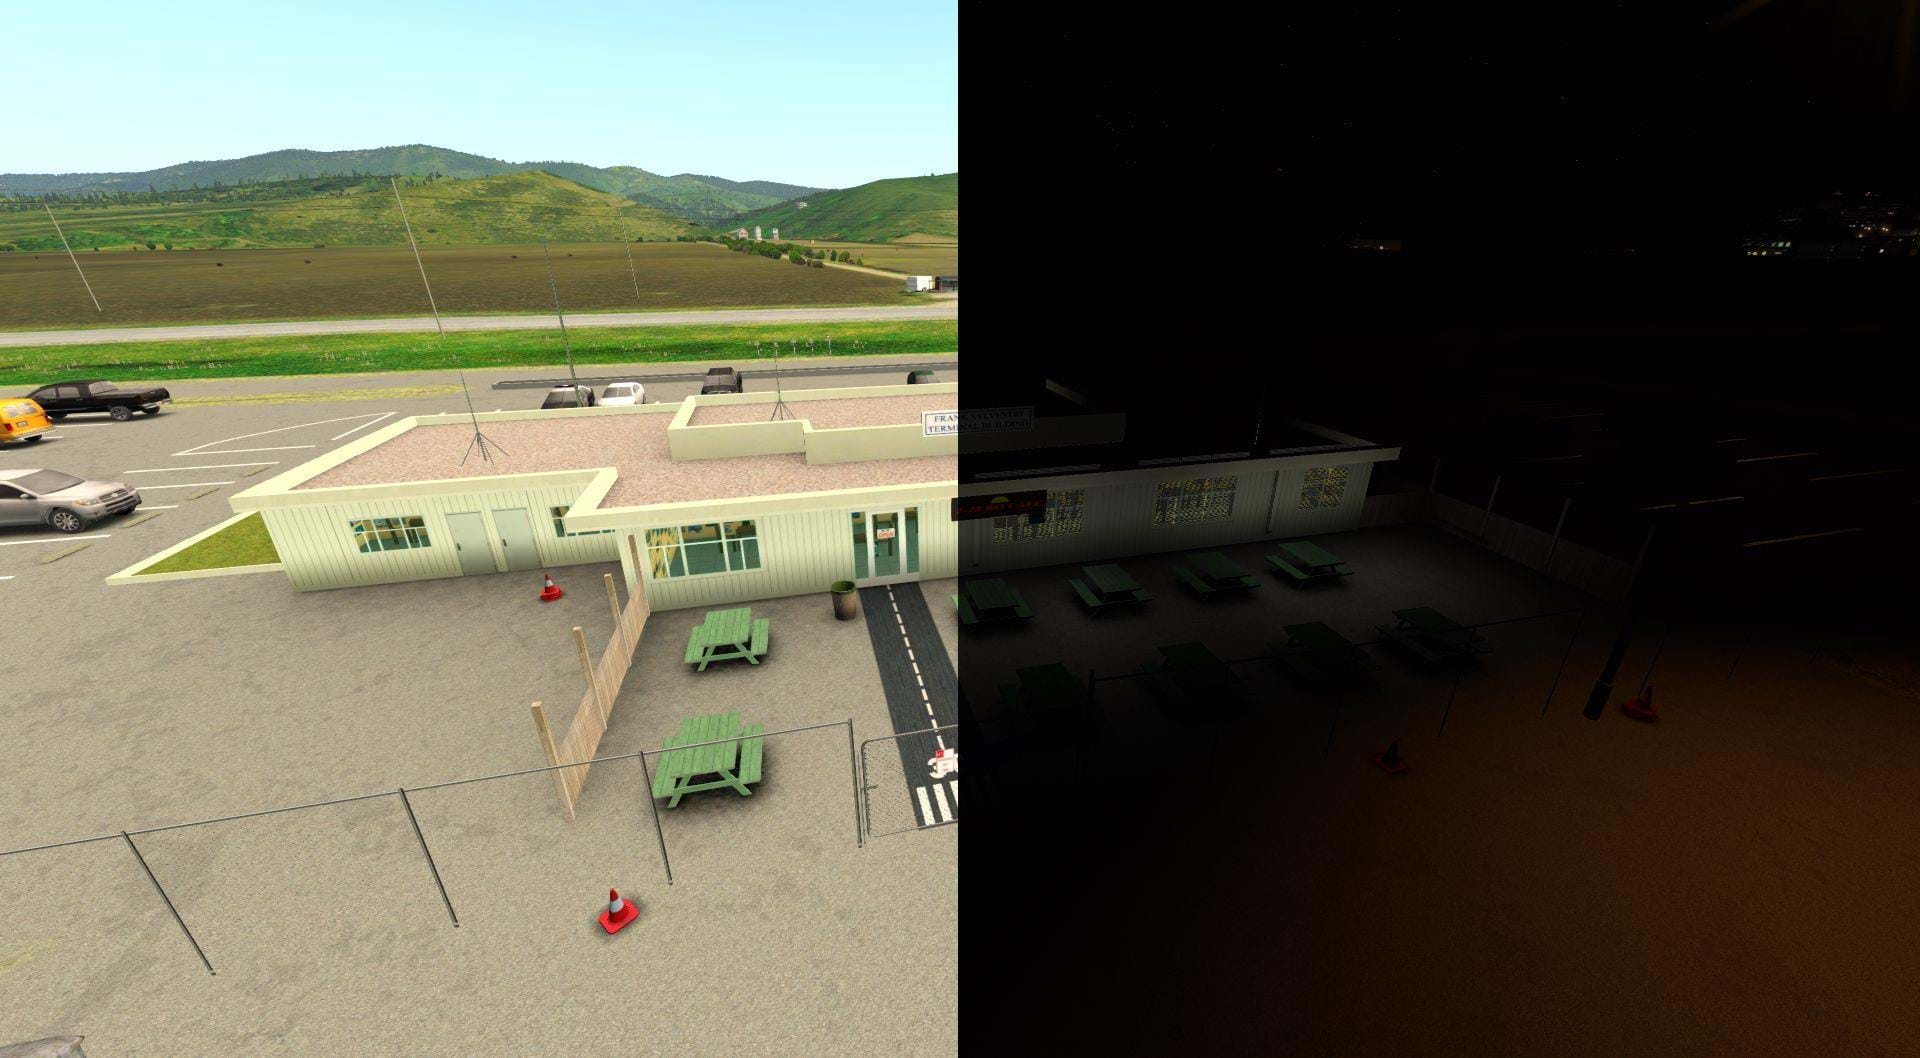 Half Moon Bay - KHAF for X-Plane - 3 zero cafe day and night